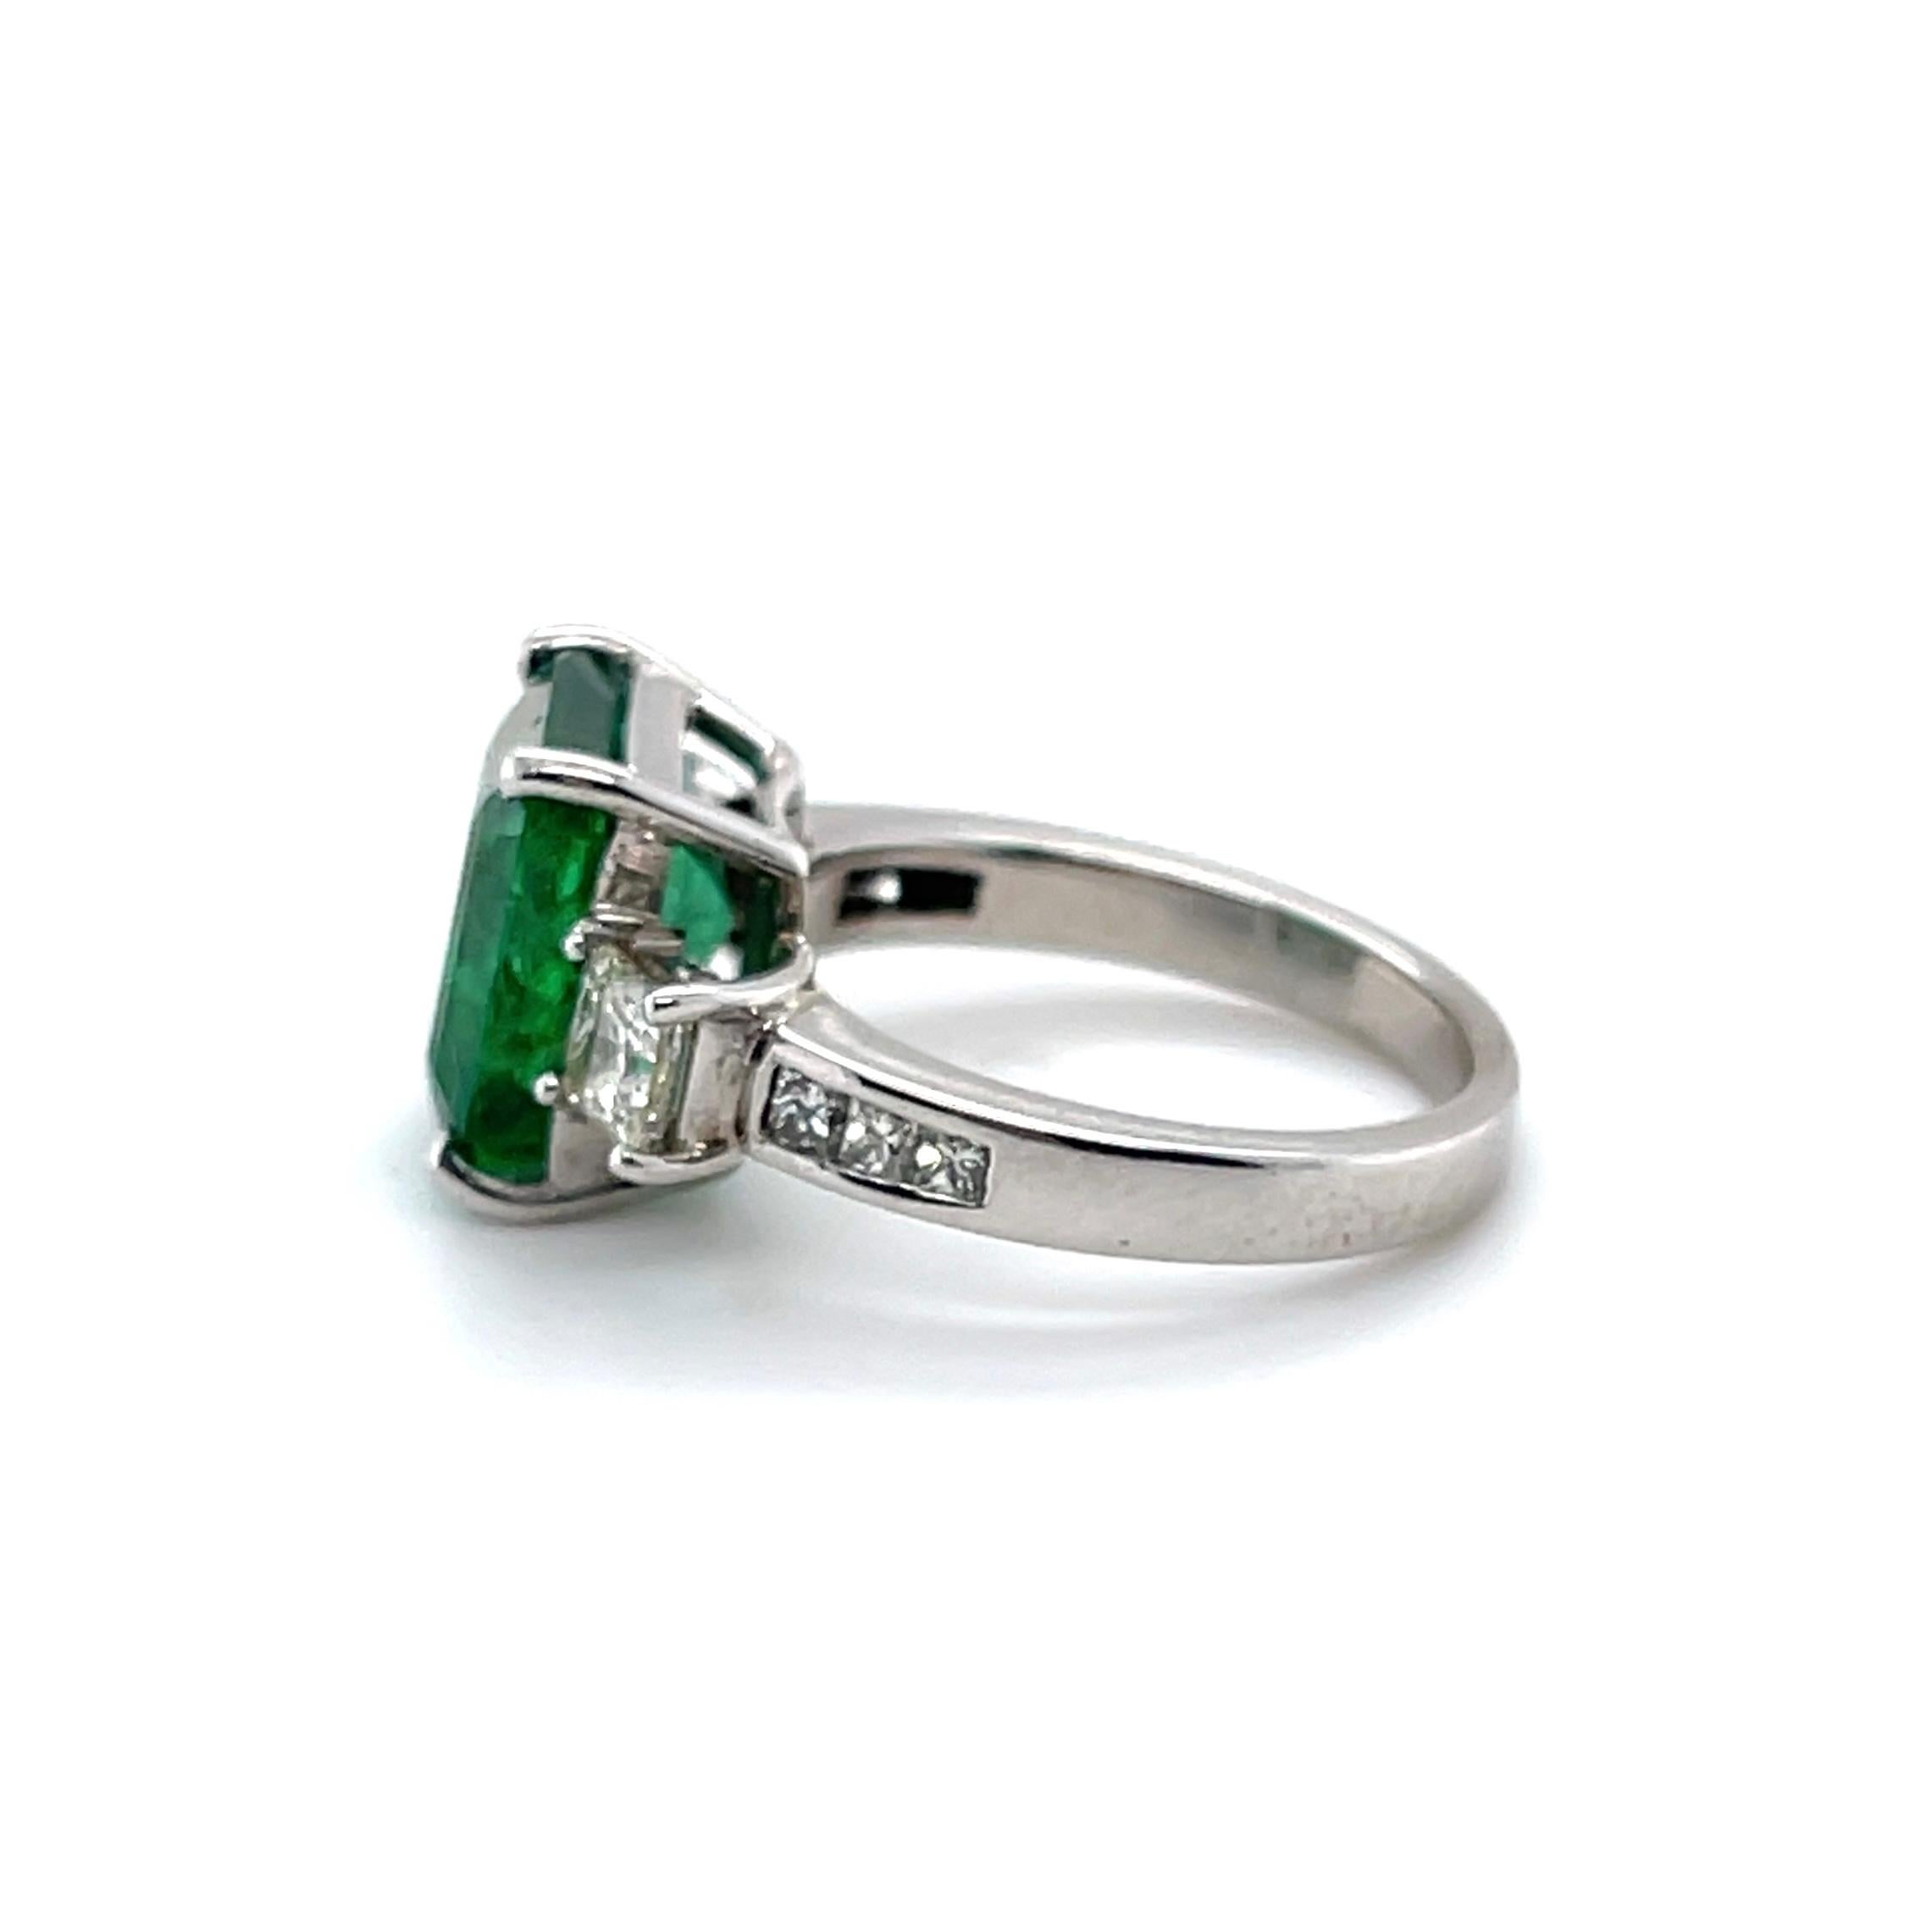 Emerald cut emerald, crafted with eighteen karat white gold, featuring stunning selection of two claw set princess cut diamonds, six channel set princess cut diamonds, complimented by a polished finish design.

Emerald weight: 4.81ct

Emerald